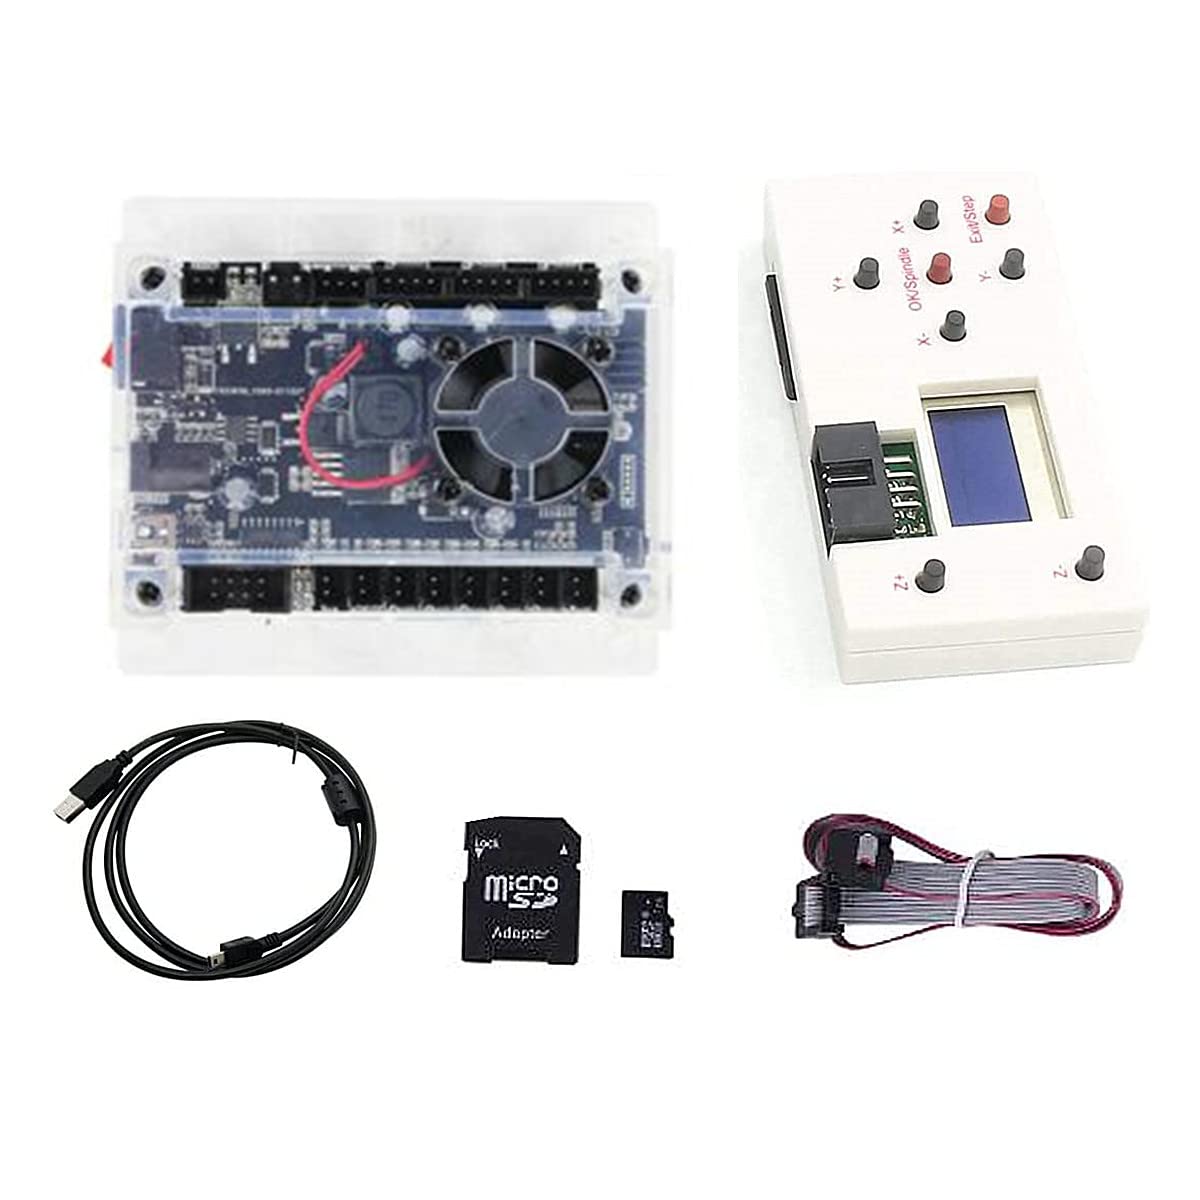 CNCTOPBAOS 3 Axis GRBL Control Board USB Port CNC Router Controller Board grbl 1.1f with GRBL Offline Controller Remote Hand Control for CNC